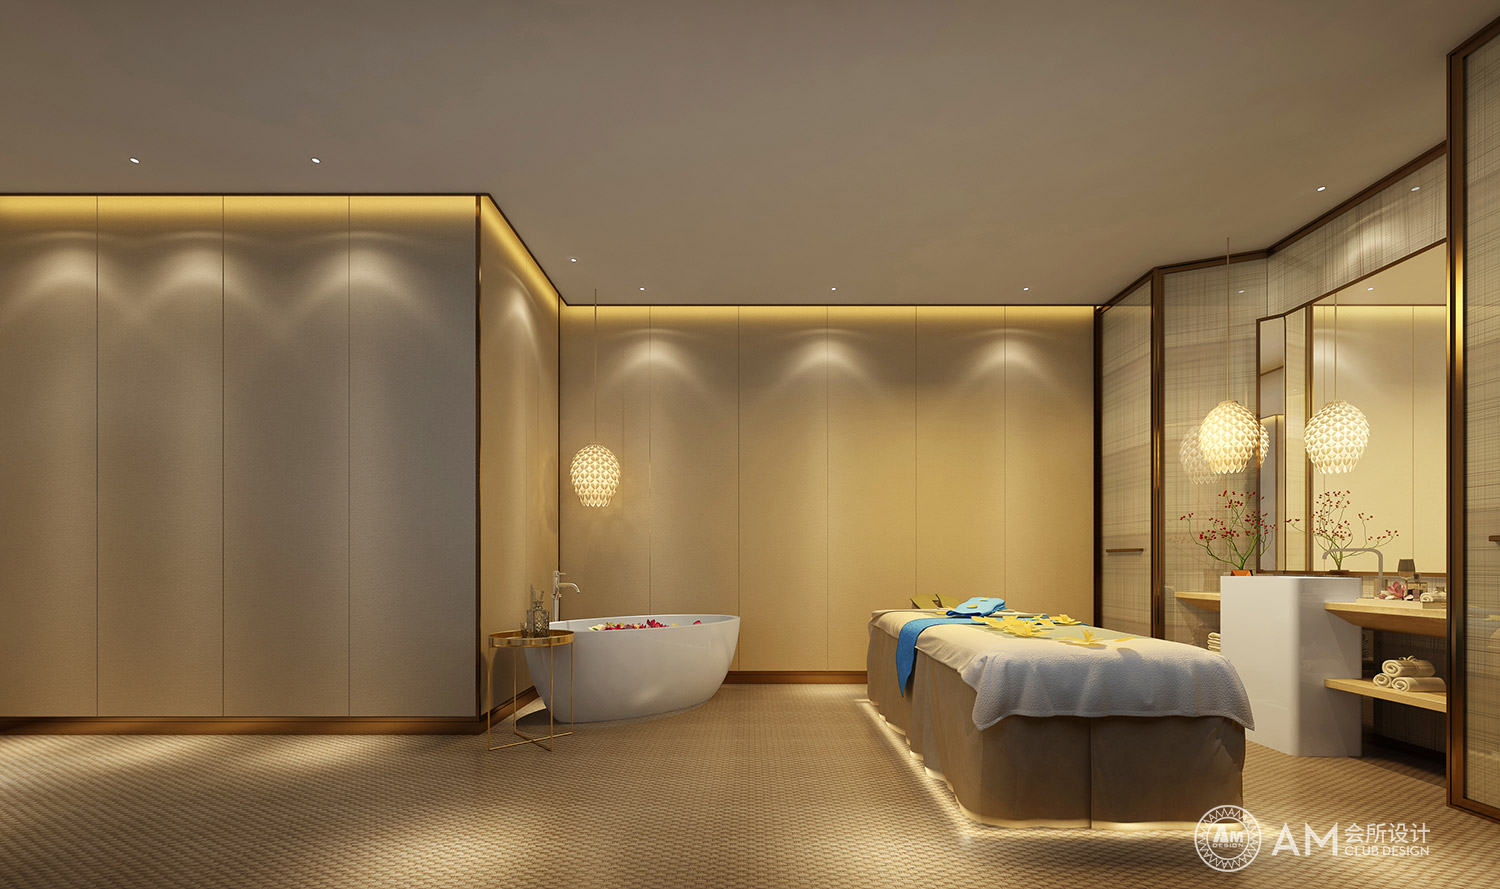 AM DESIGN | Spa room design of top spa spa in Sijihuacheng